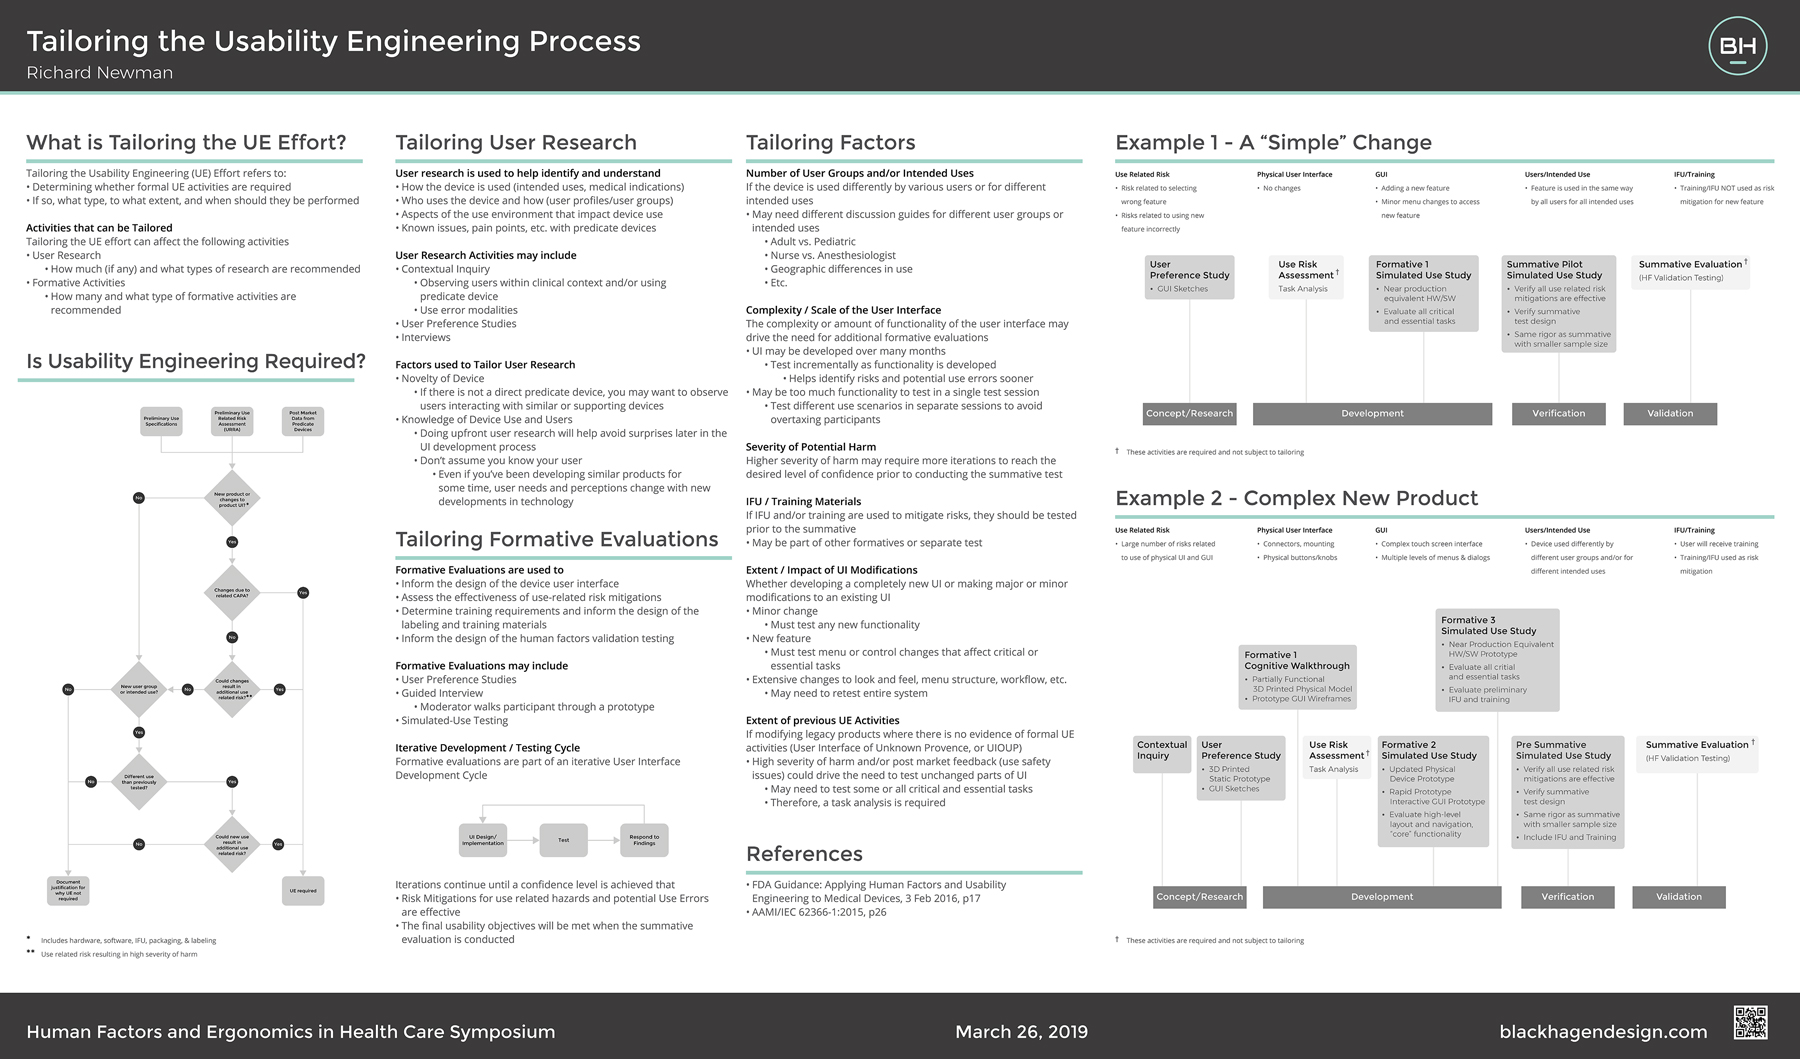 Richard Newman Tailoring the Usability Engineering Process Poster